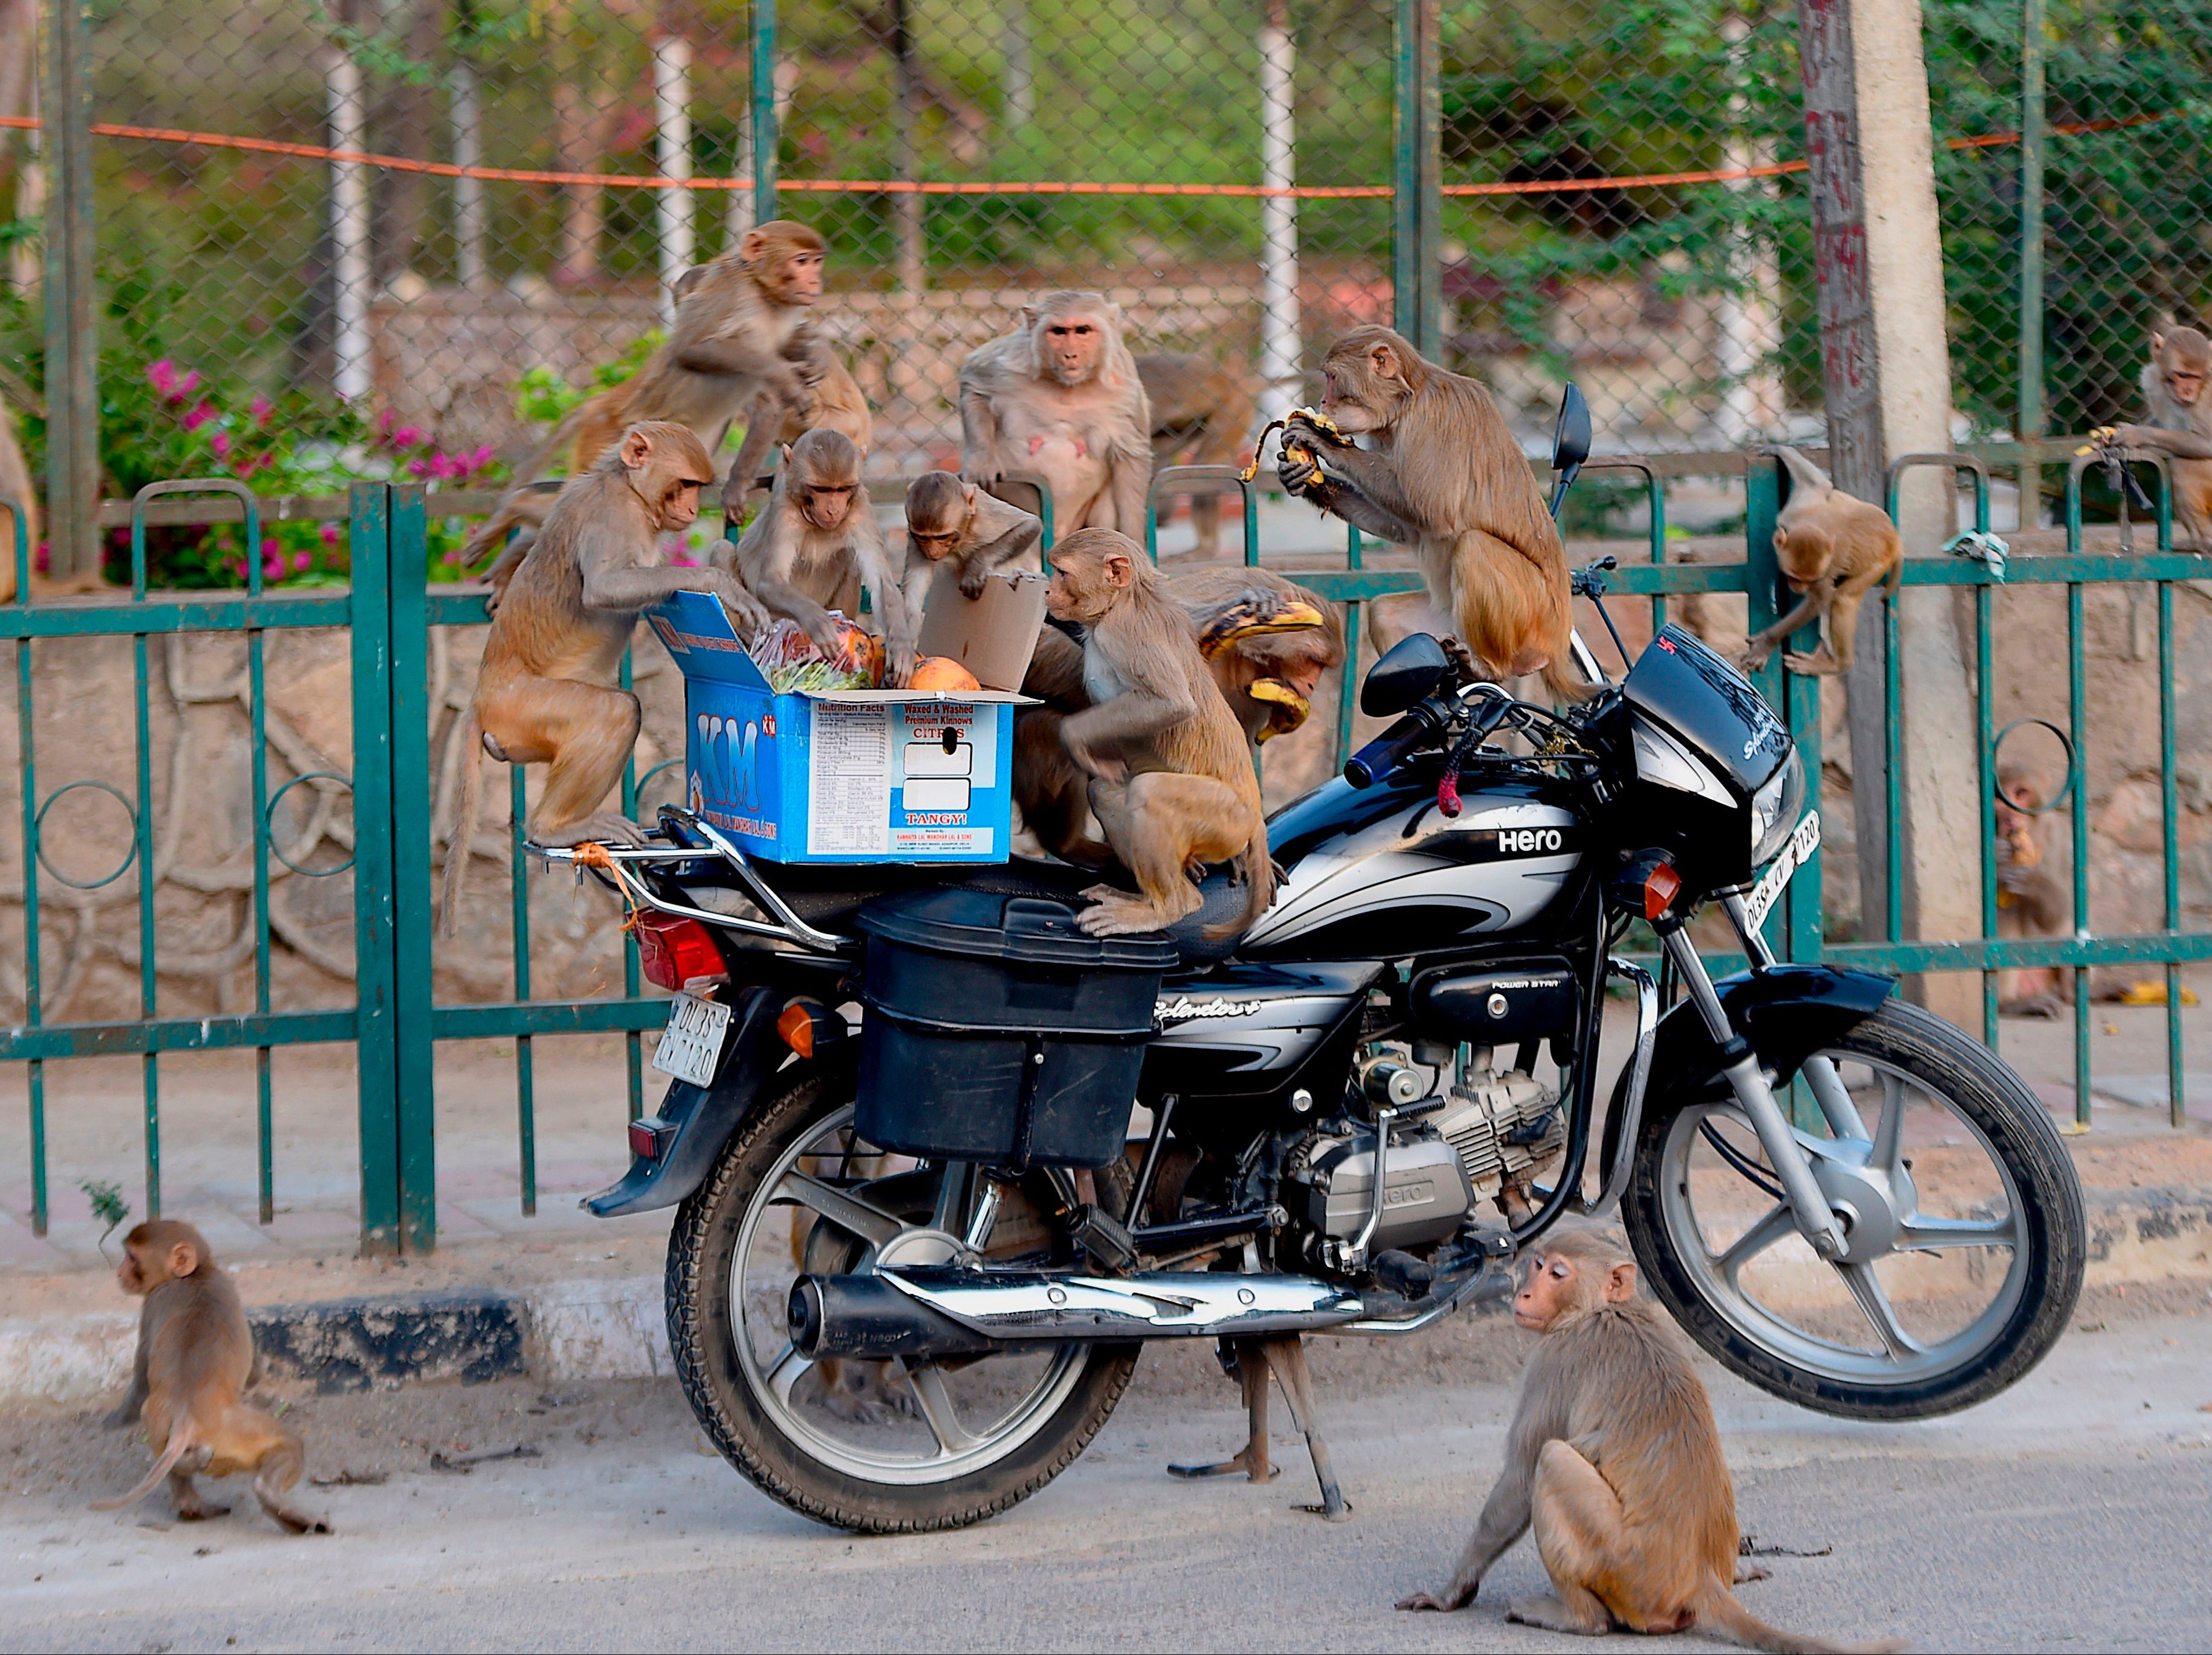 File image: The Indian government is trying to tackle the problem of conflict between monkeys and humans